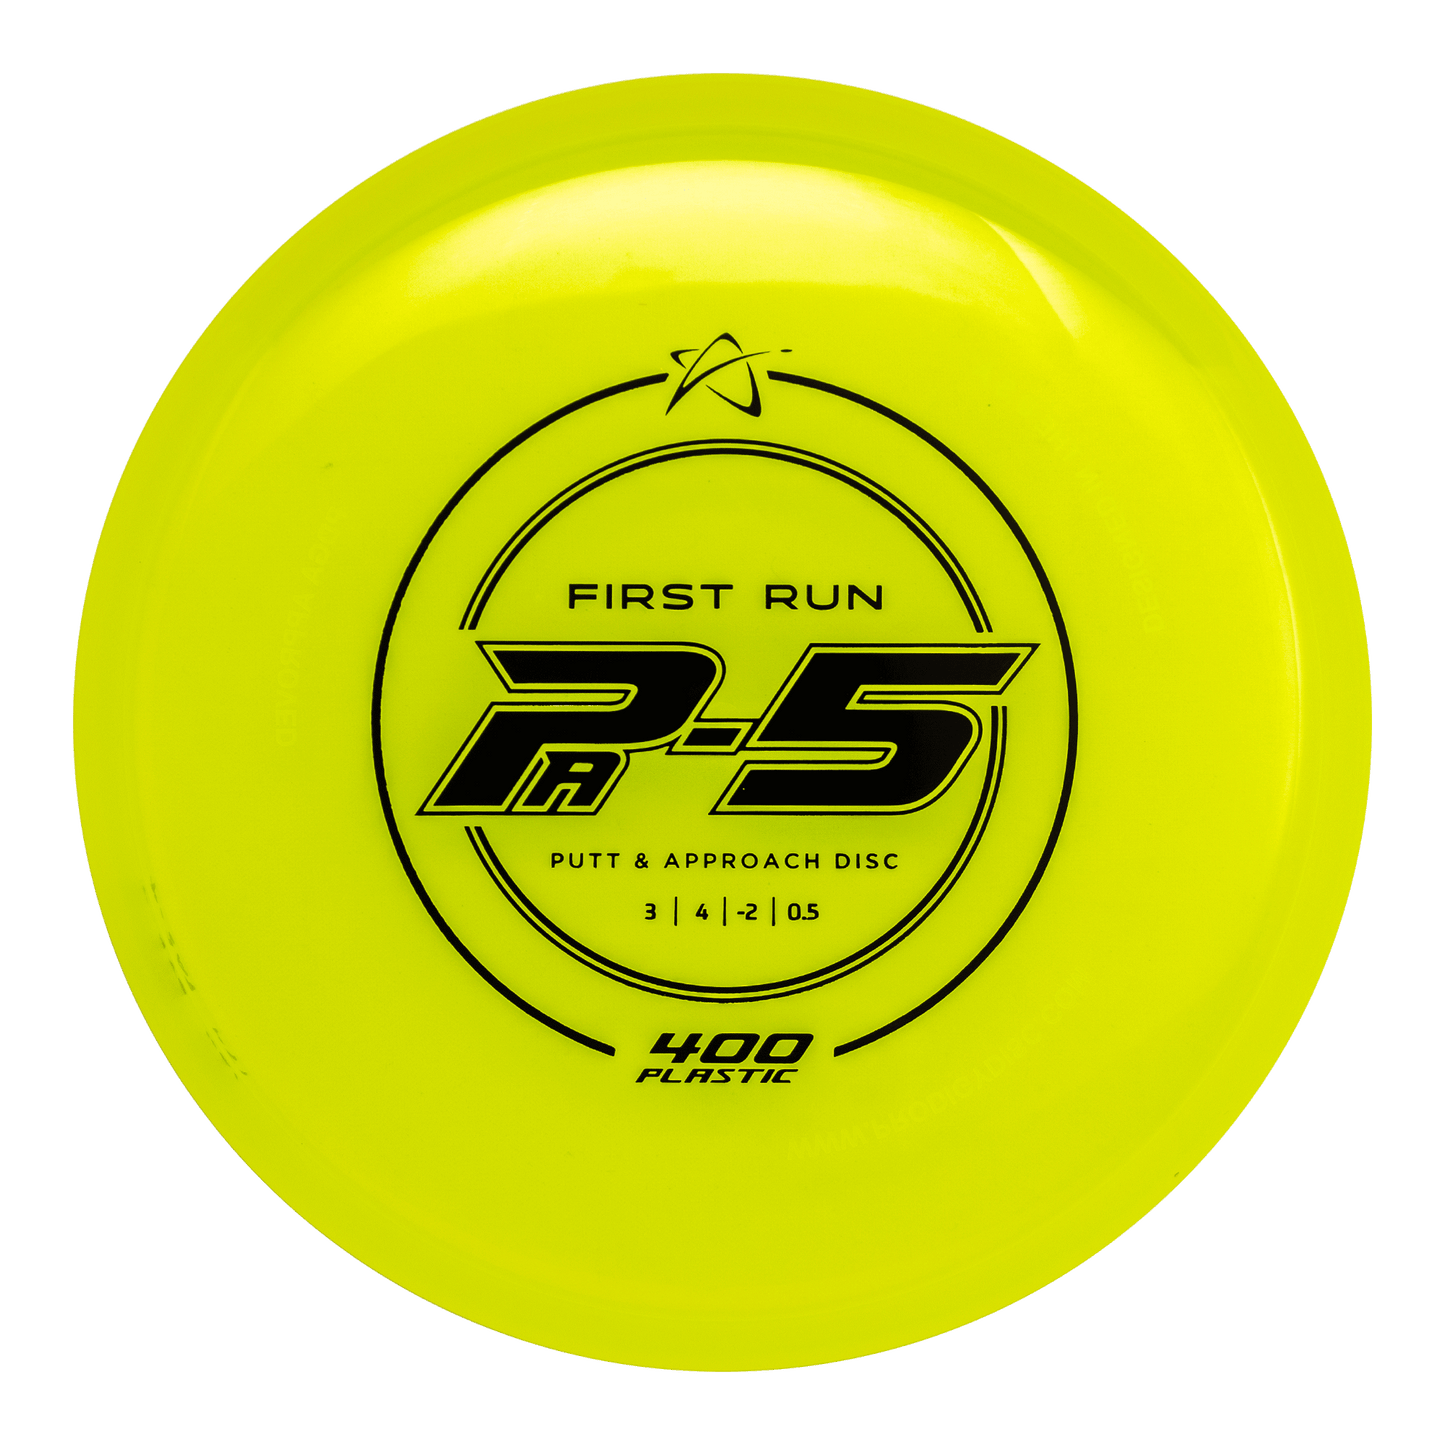 Prodigy PA-5 Putt & Approach Disc - 400 Plastic - First Run Stamp